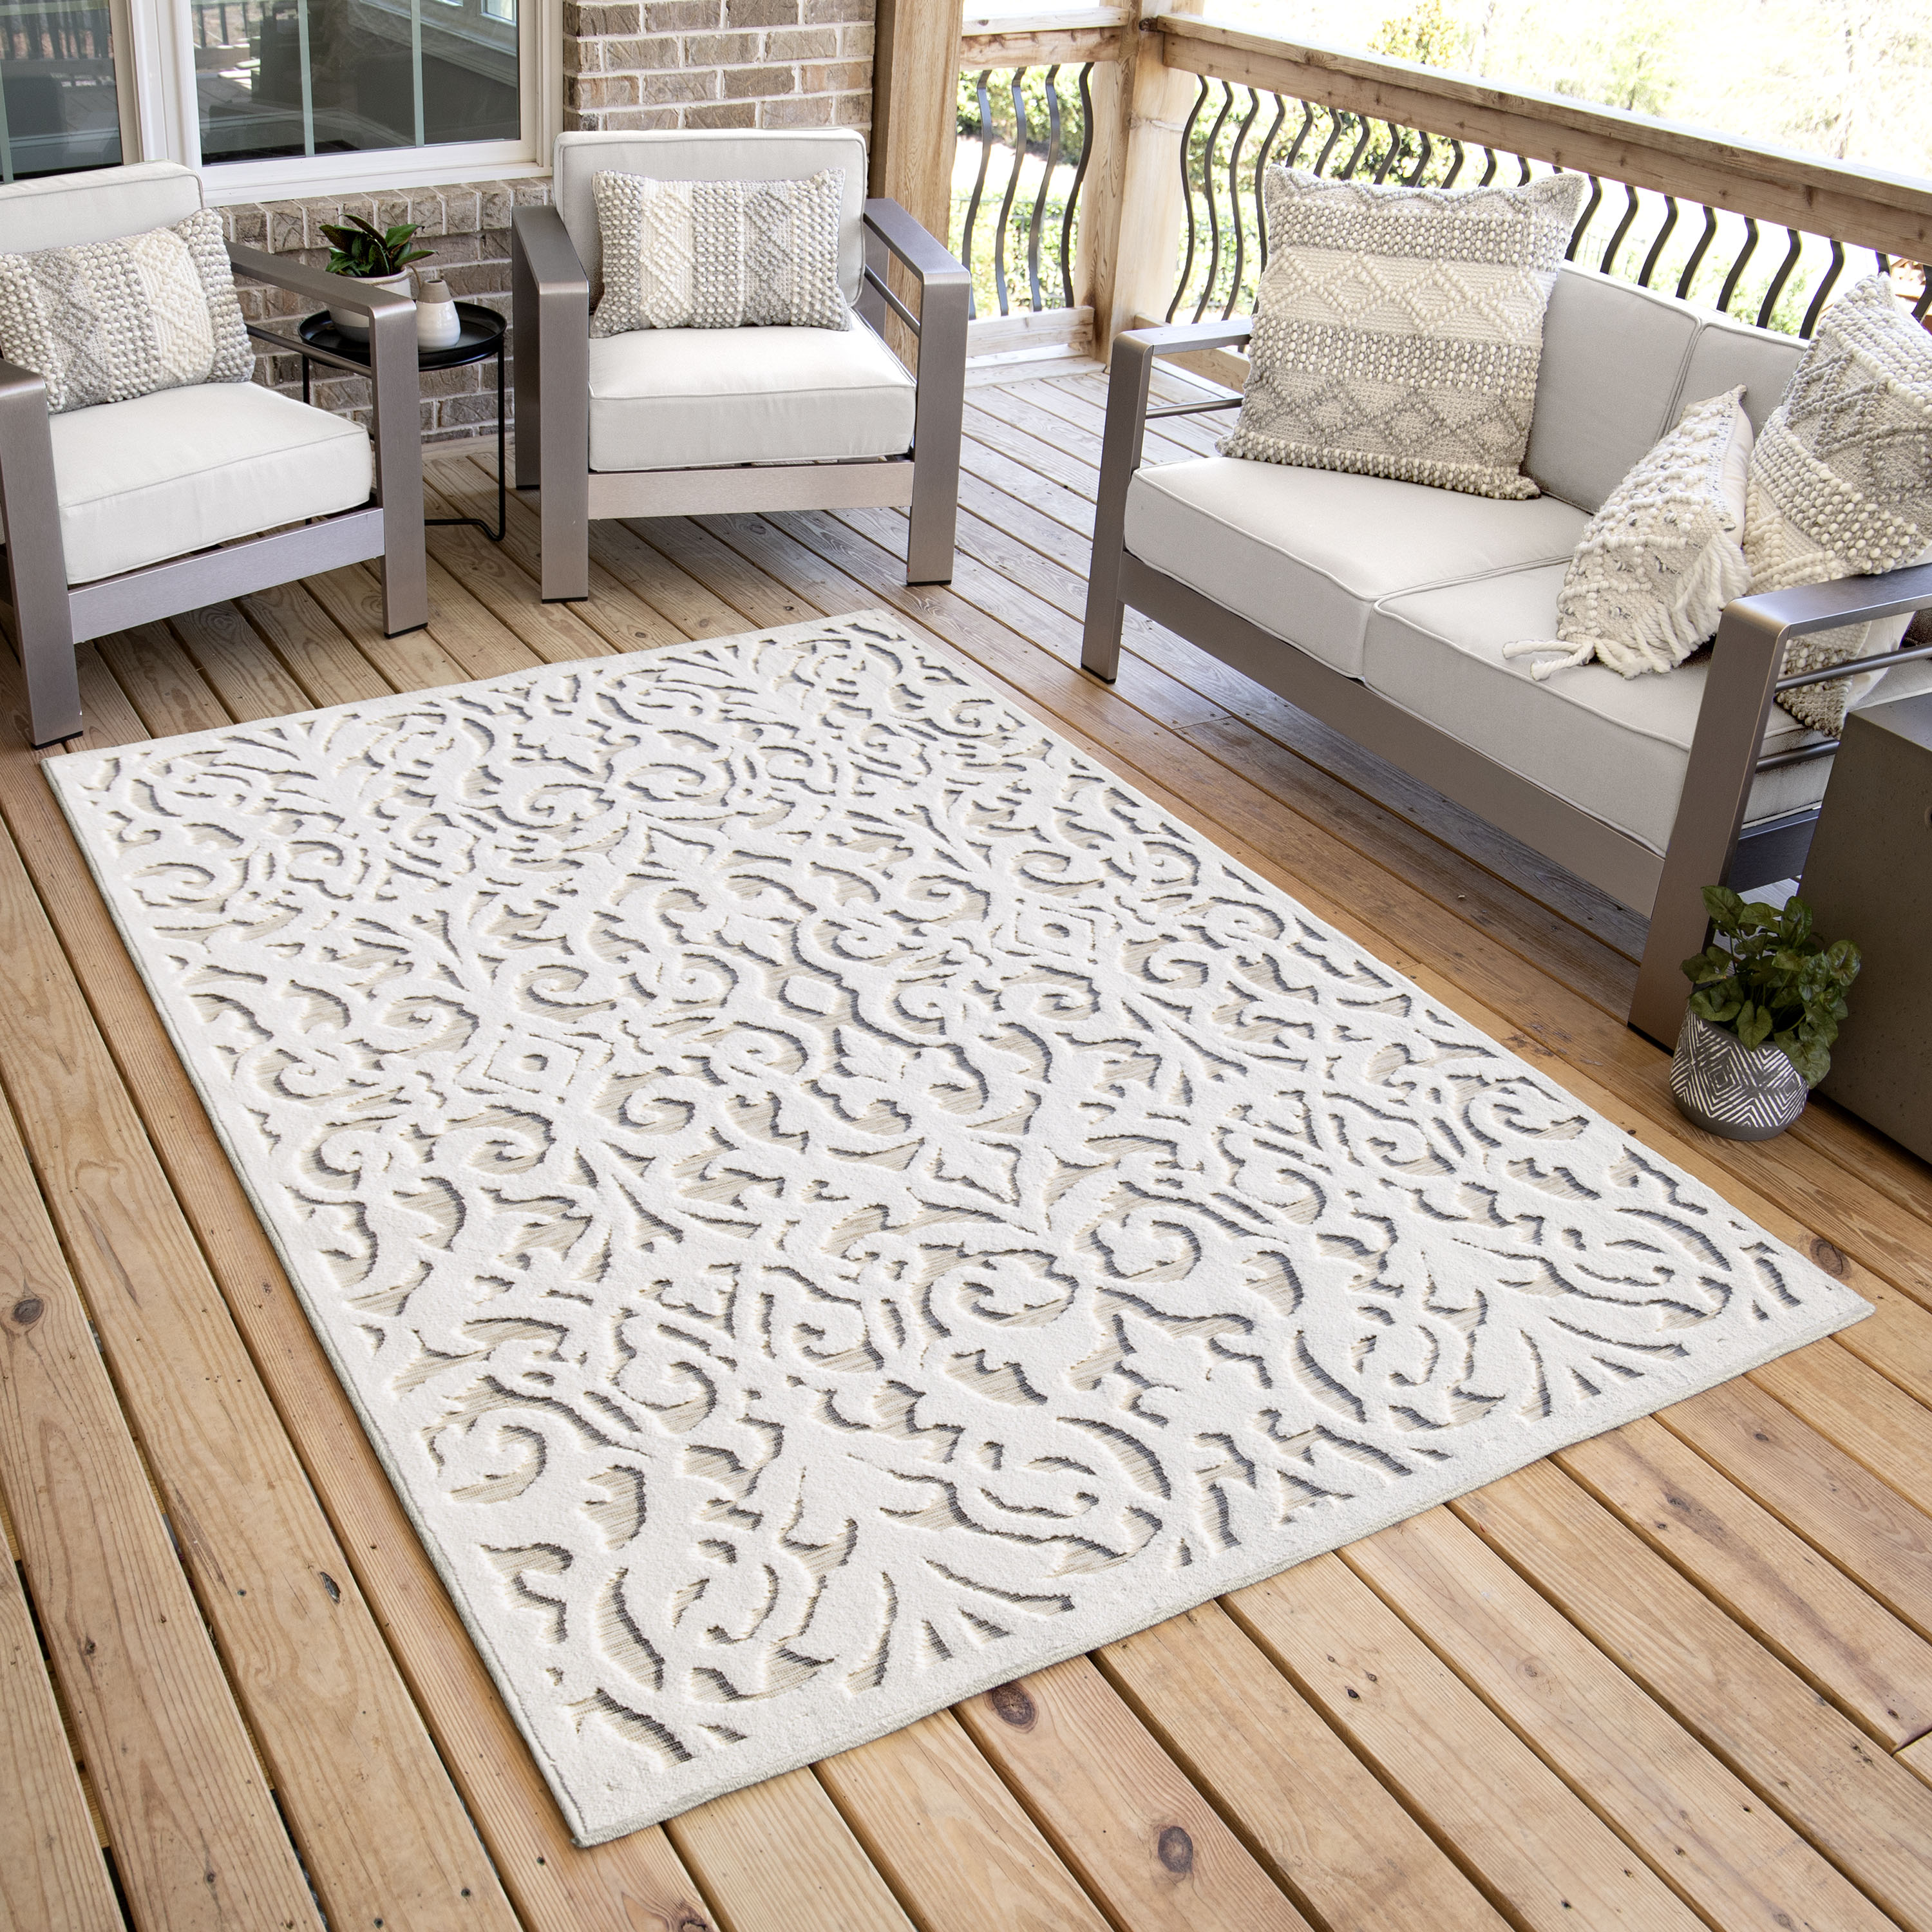 New My Texas House Spring Doormats & Outdoor Rugs - My Texas House